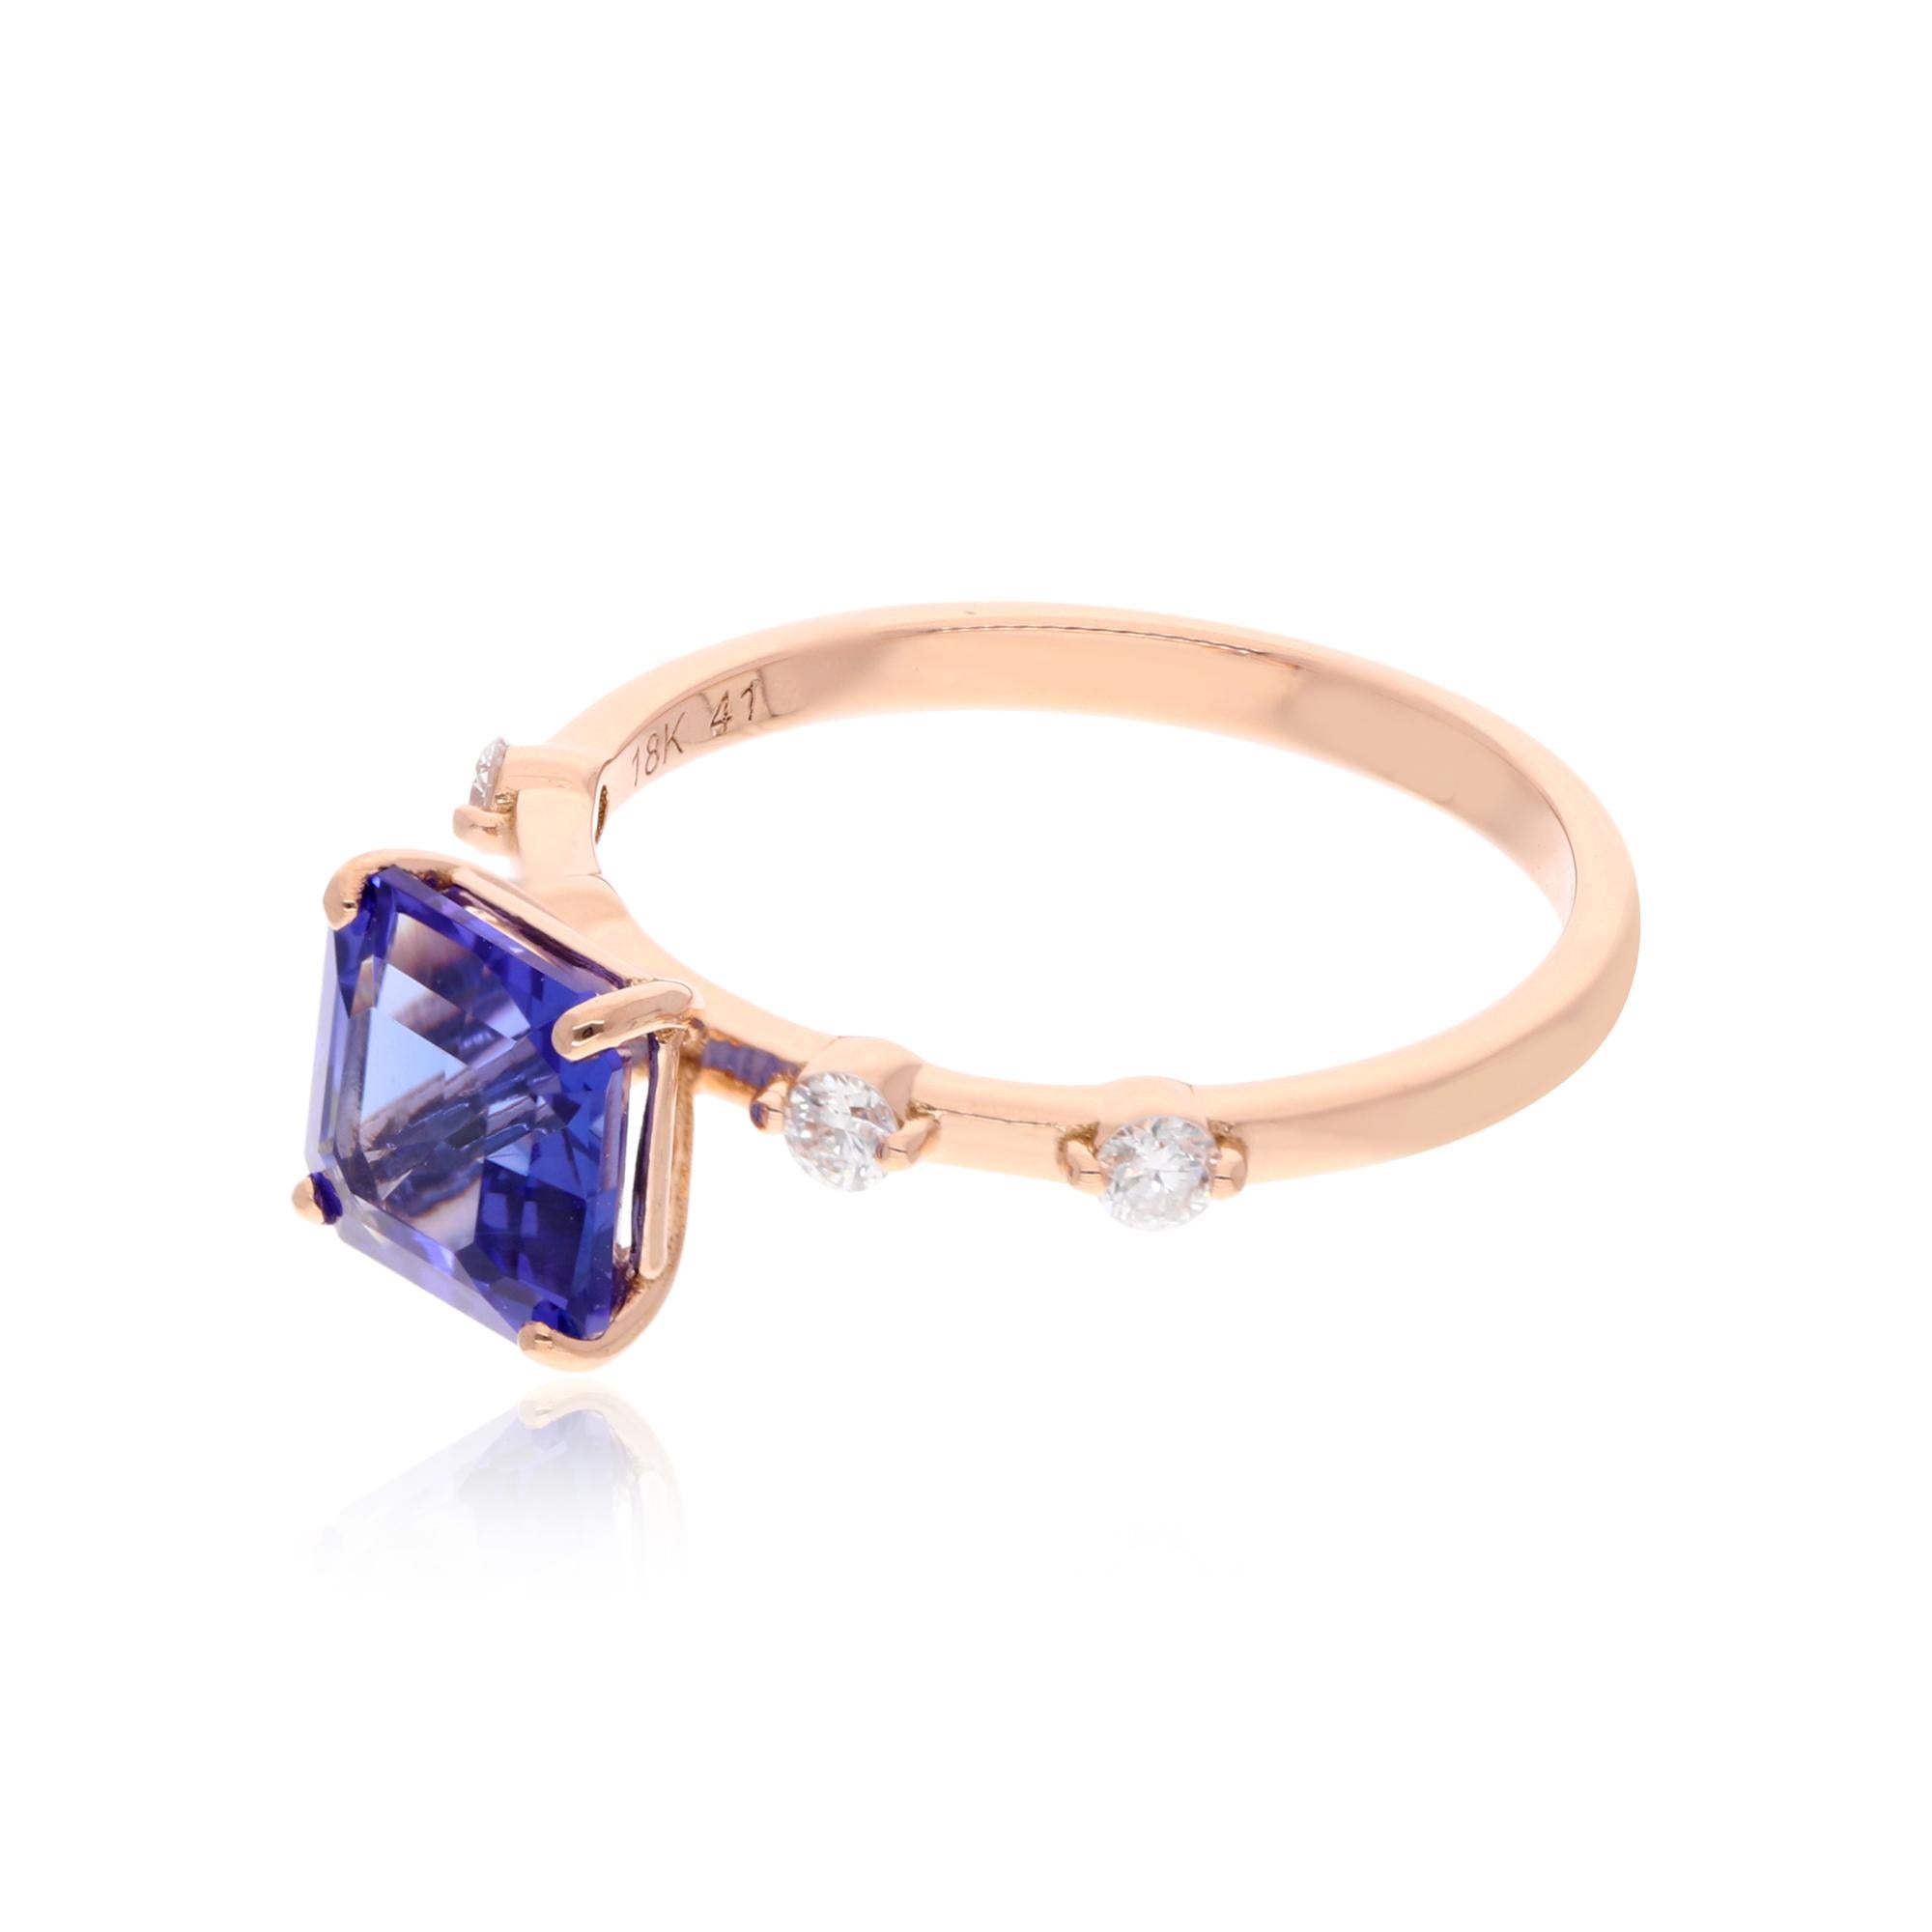 Item Code :- SER-22354
Gross Wt. :- 2.91 gm
18k Rose Gold Wt. :- 2.45 gm
Diamond Wt. :- 0.20 Ct. ( AVERAGE DIAMOND CLARITY SI1-SI2 & COLOR H-I )
Tanzanite Wt. :- 2.12 Ct
Ring Size :- 7 US & All size available

✦ Sizing
.....................
We can